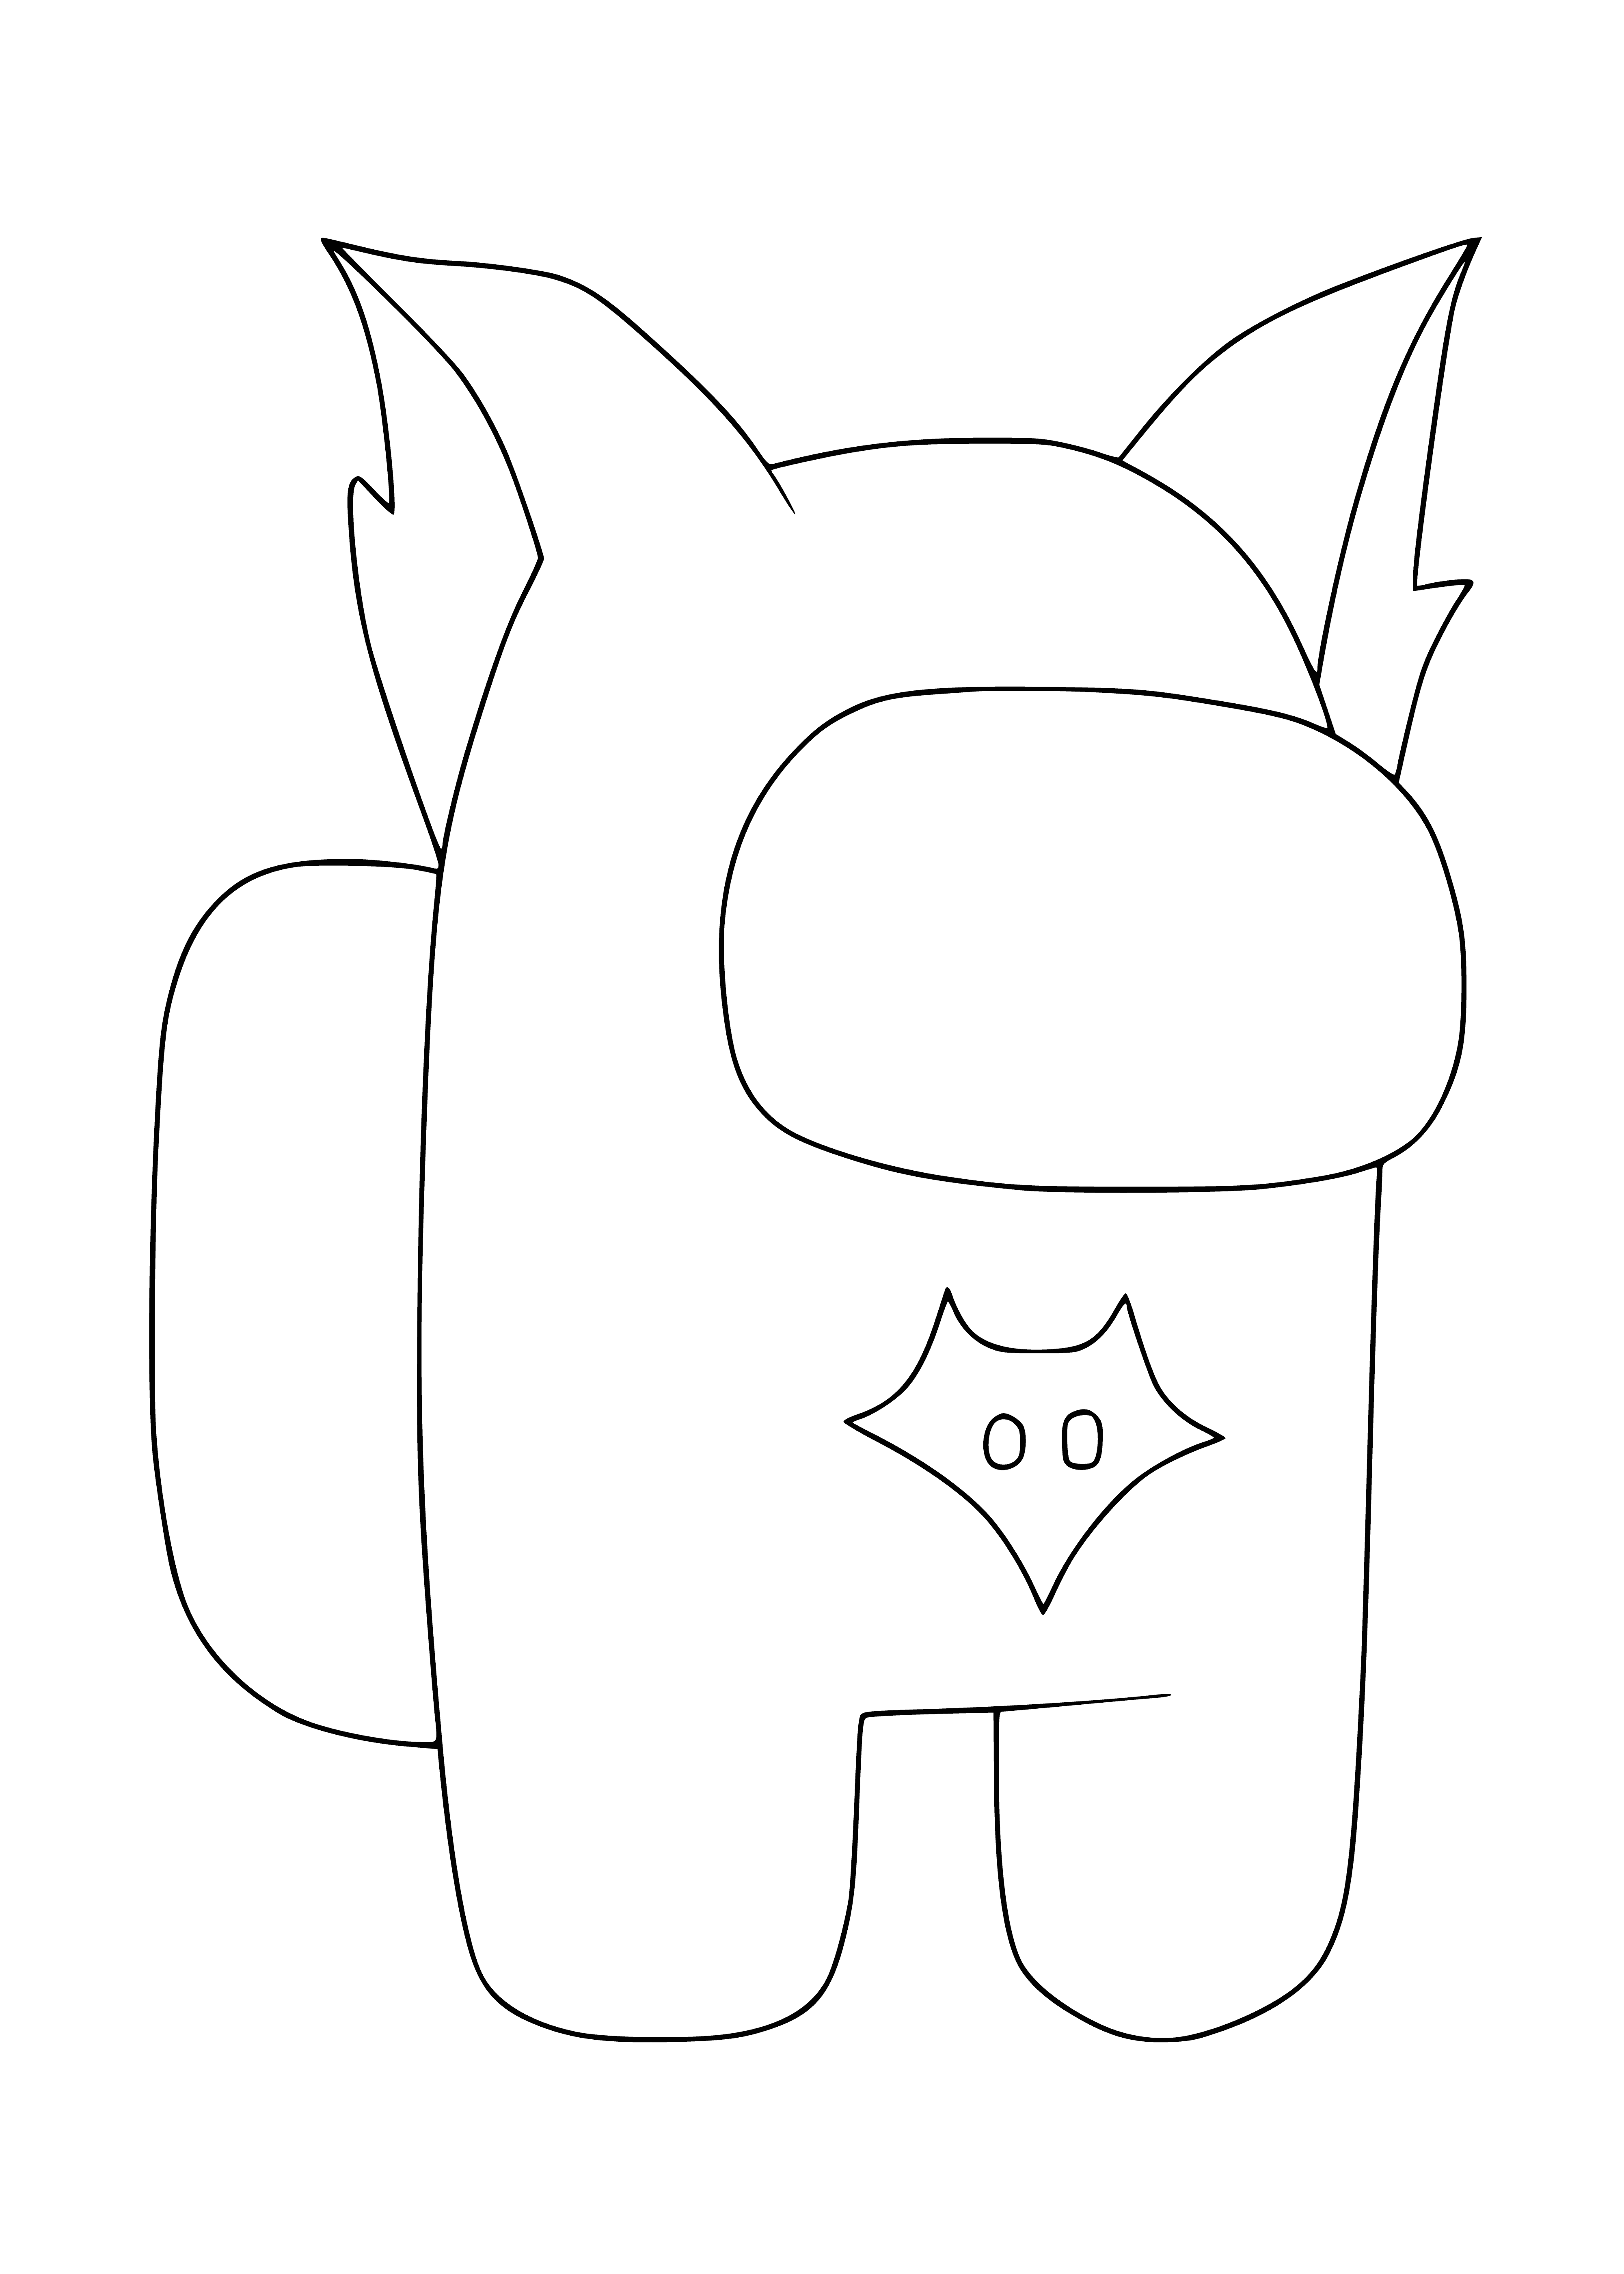 coloring page: Large green 3-eyed creature with red tongue, sharp teeth & claw-like hands surrounded by a group of small, yellow, antennae-having creatures, all afraid.